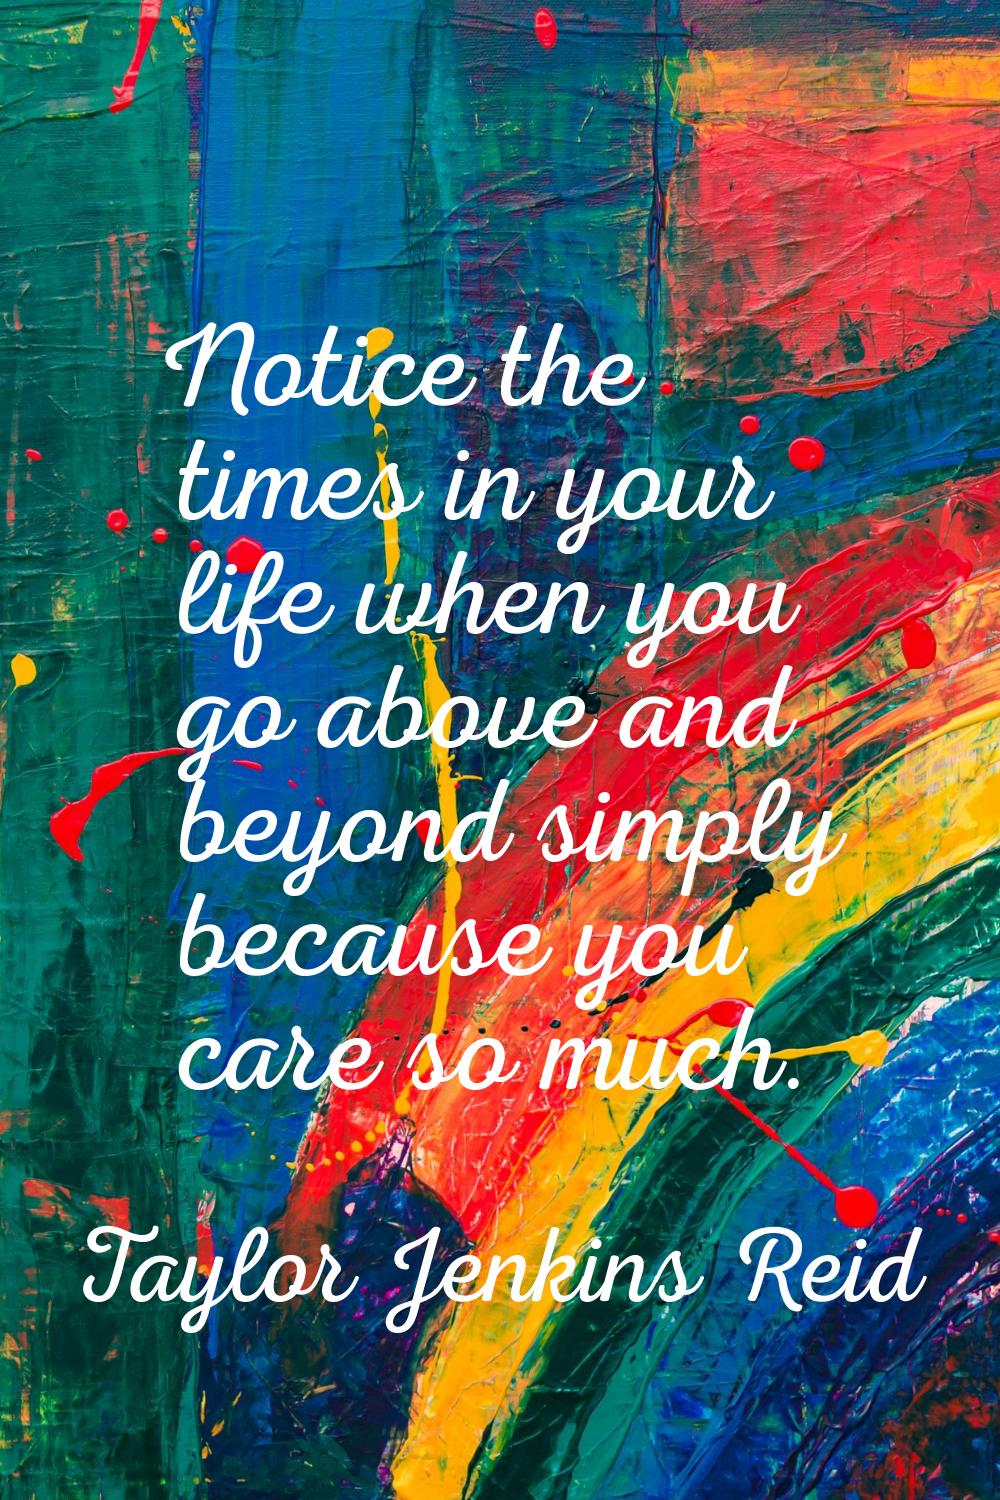 Notice the times in your life when you go above and beyond simply because you care so much.